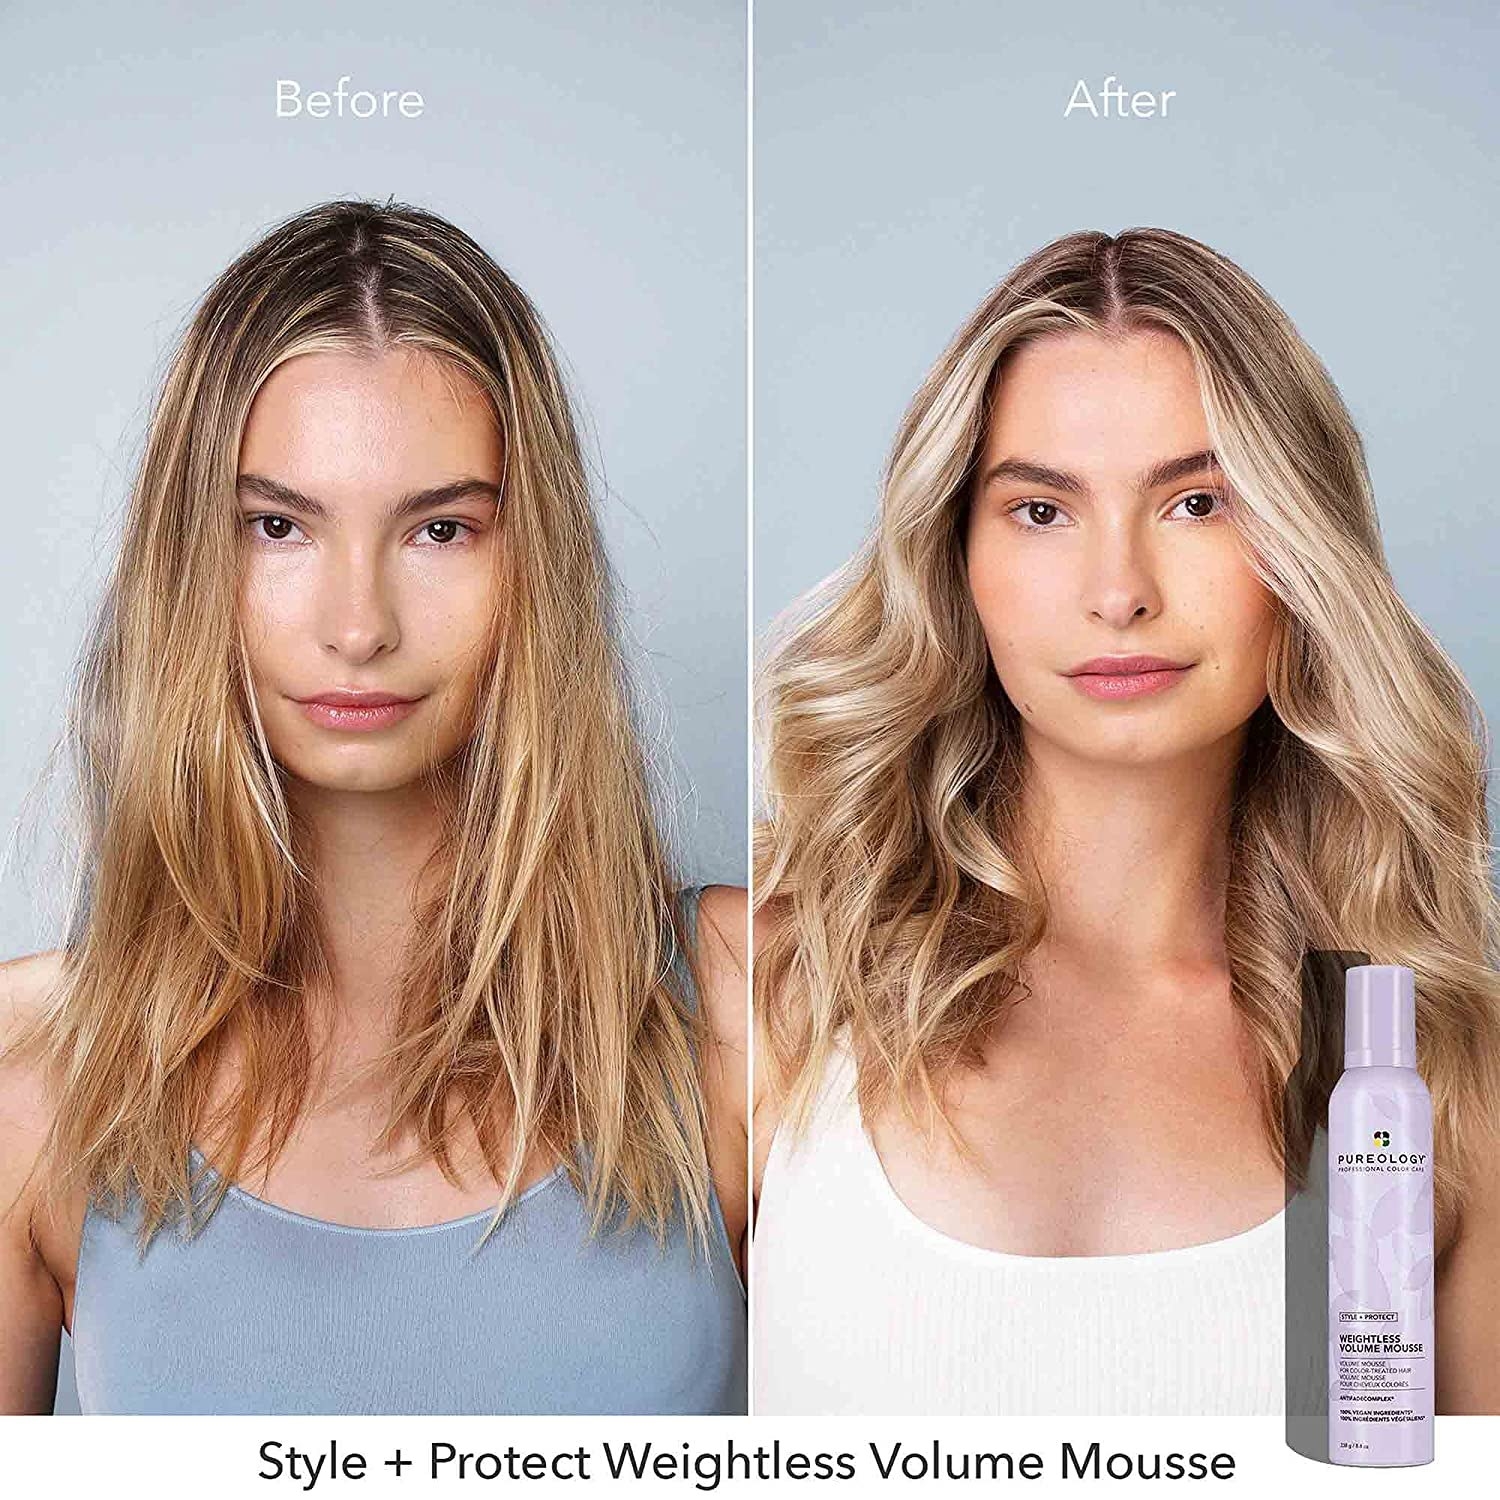 A set of before and after images of a person using volume mousse